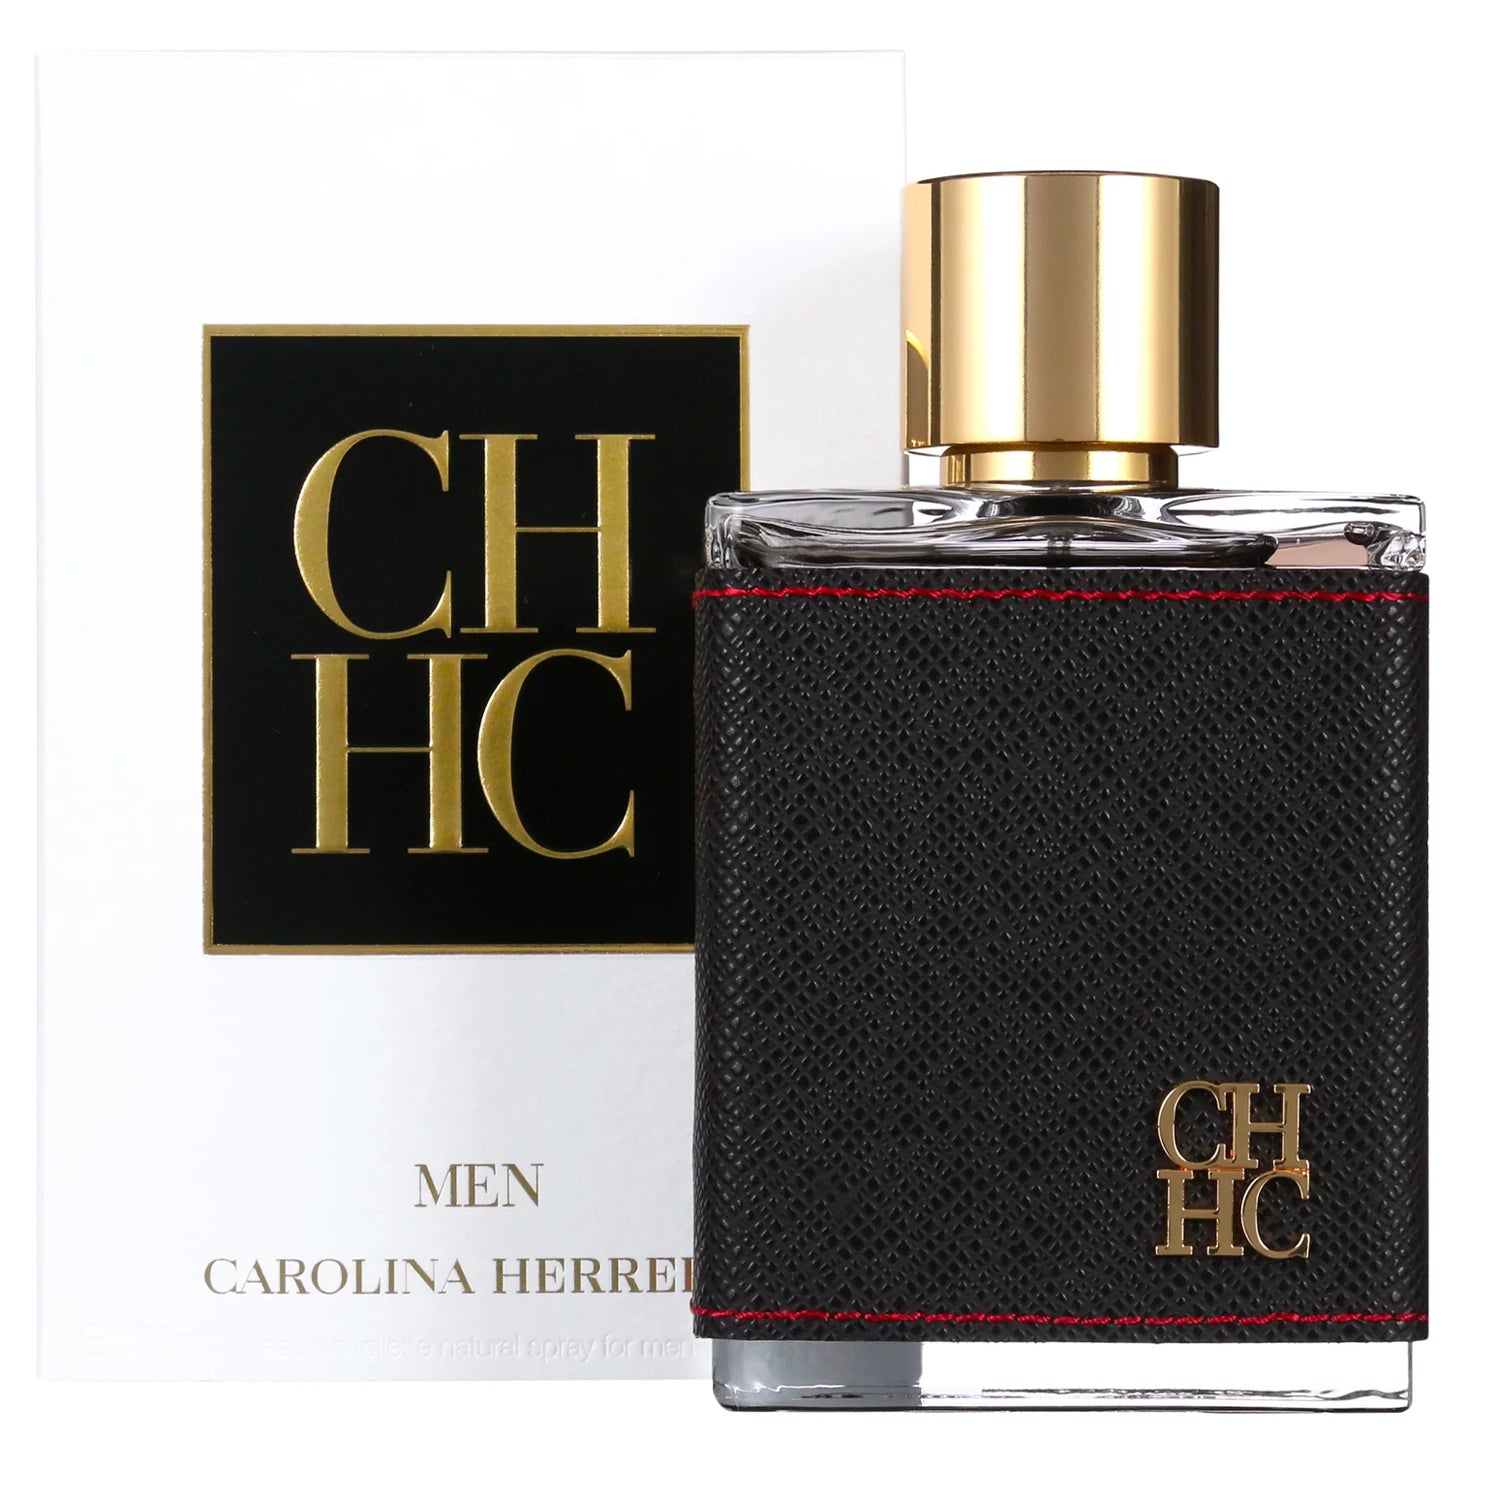 Carolina Herrera by Carolina Herrera Carolina Herrera perfume - a fragrance  for women 1988